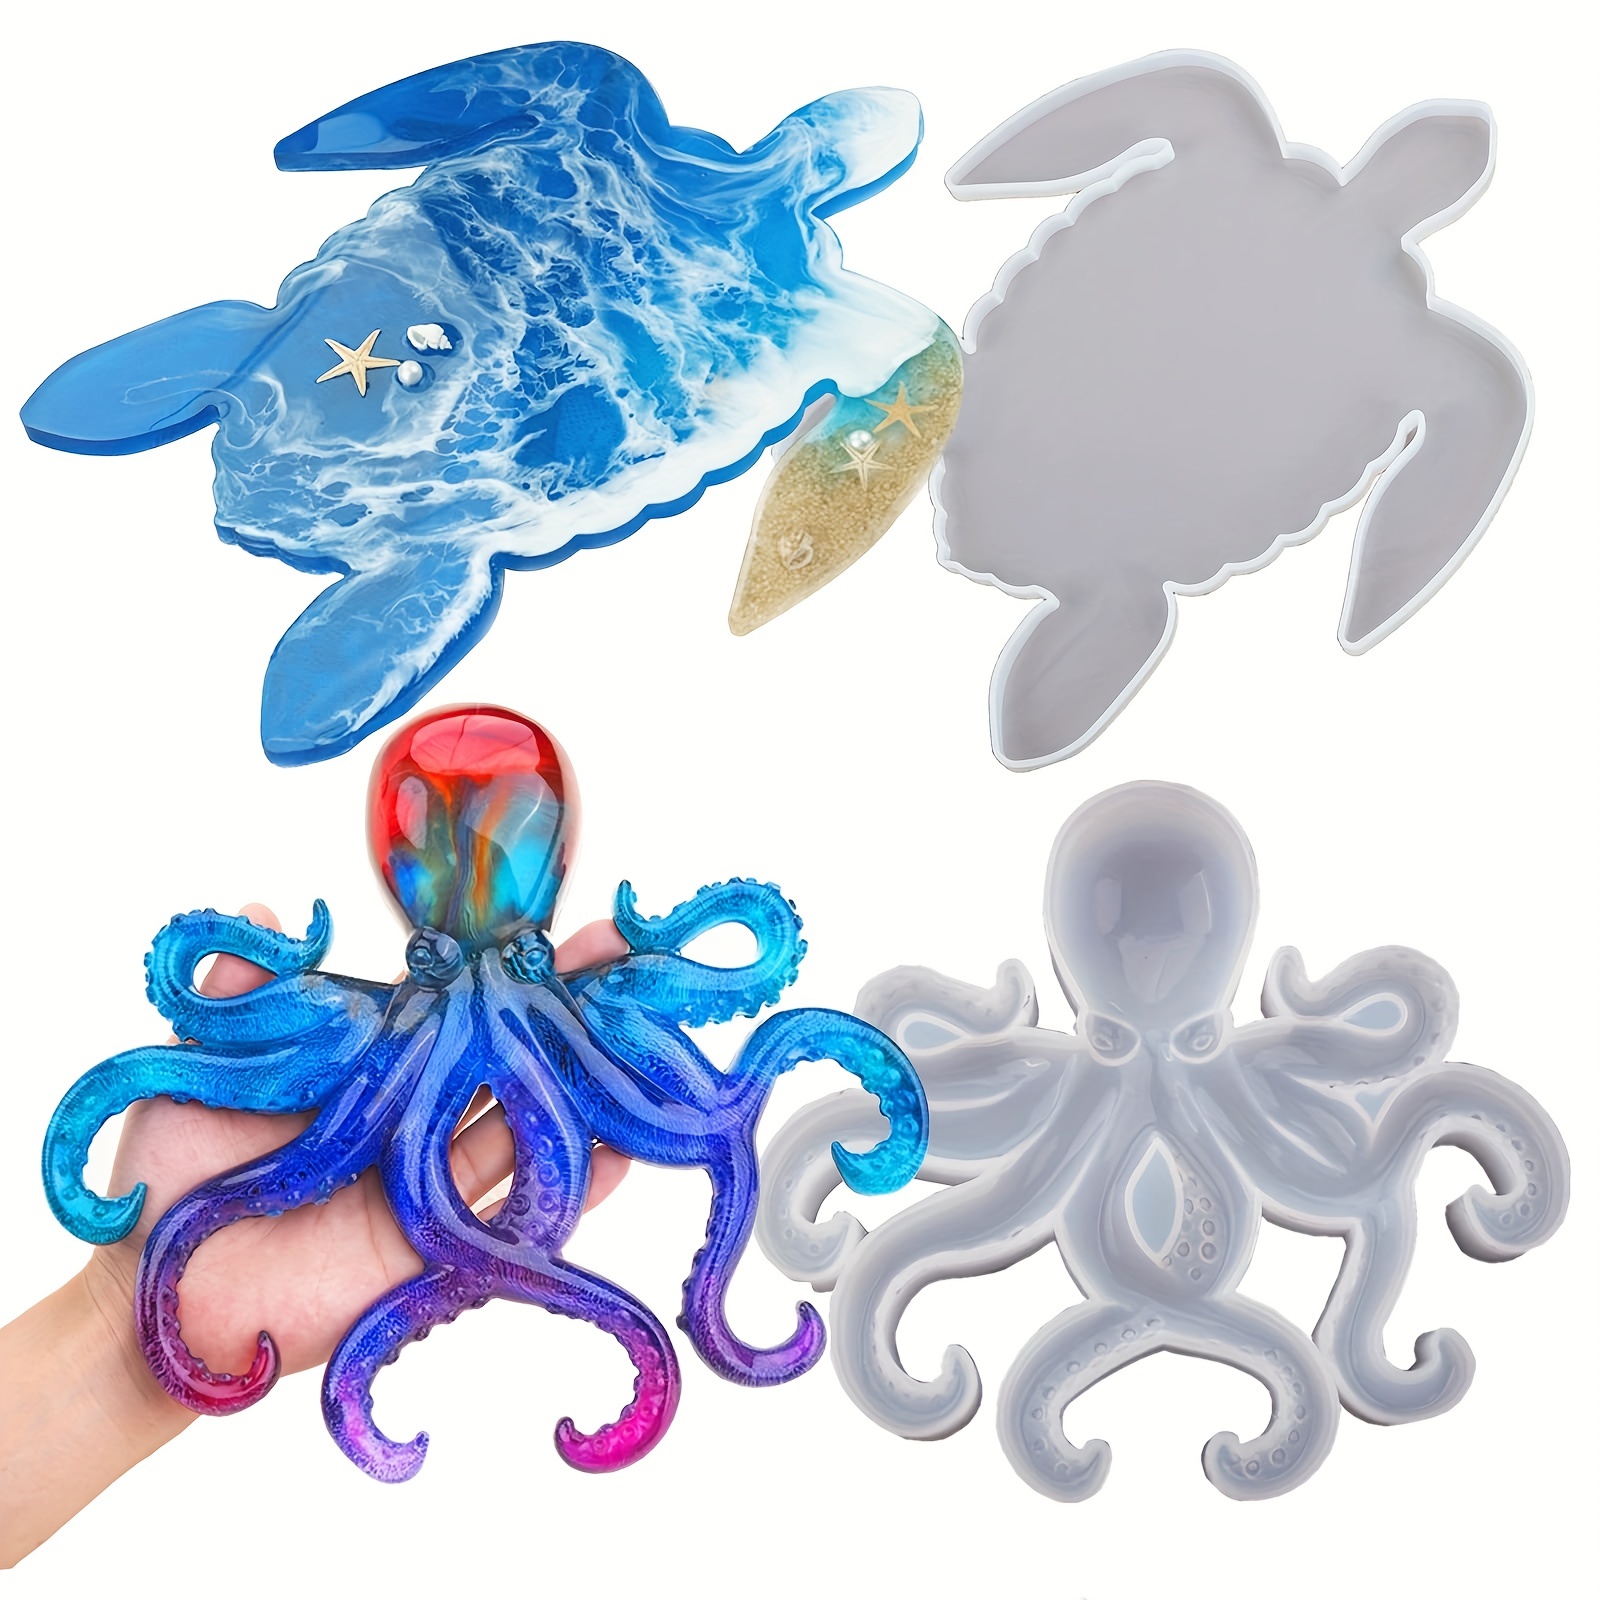 

1pc Resin Large Sea Turtle Silicone Tray Mold Silicone Octopus Shape Epoxy Resin Casting Mould Diy Ocean Art Craft Kit Home Resin Ornament Mold Marine Animals Craft Supplies